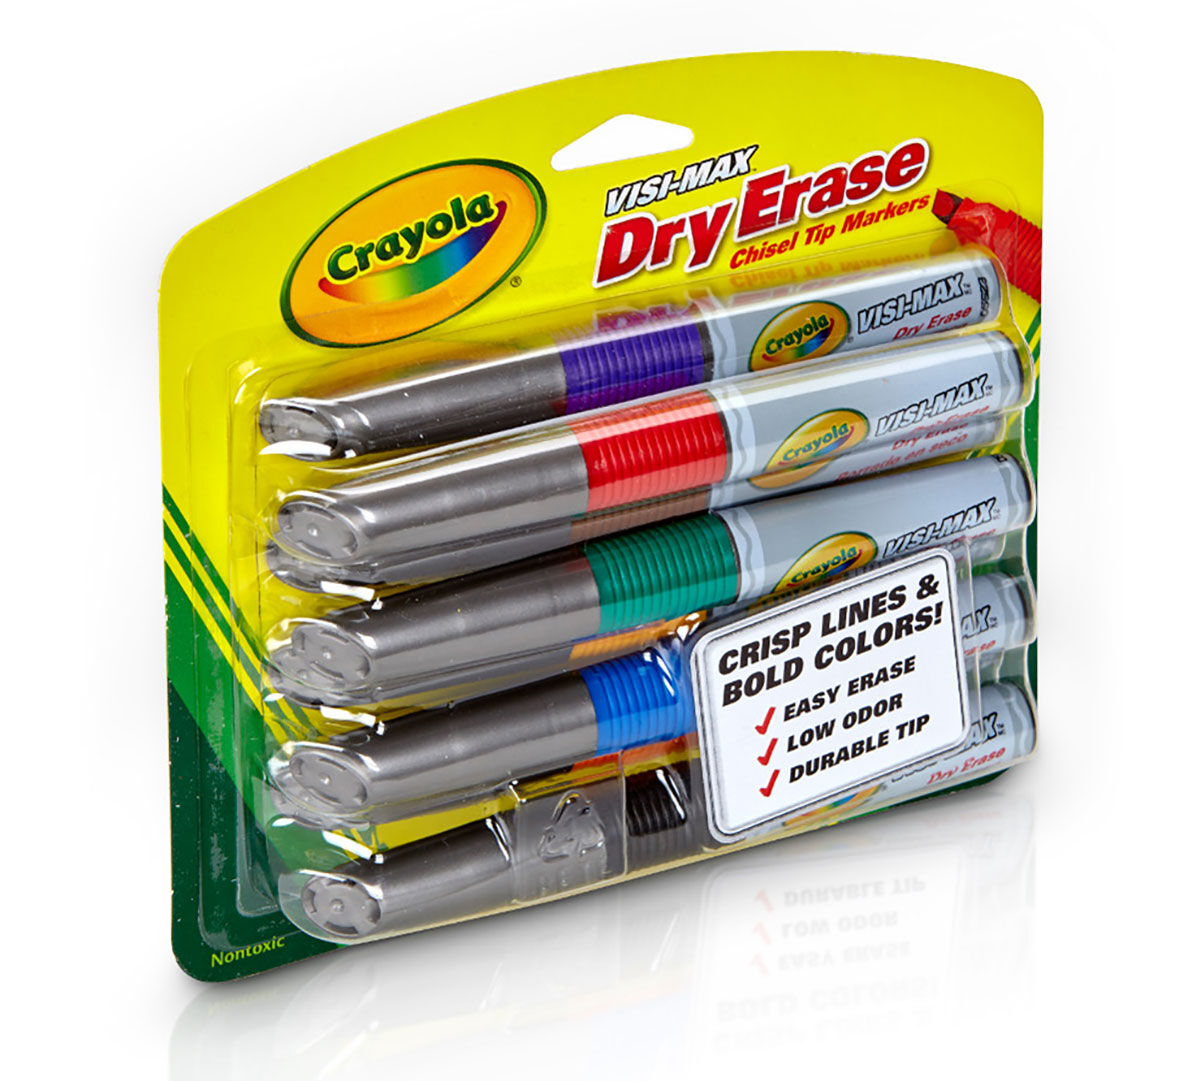 4 Count Crayola Dry Erase Markers Broad Line Office Supplies